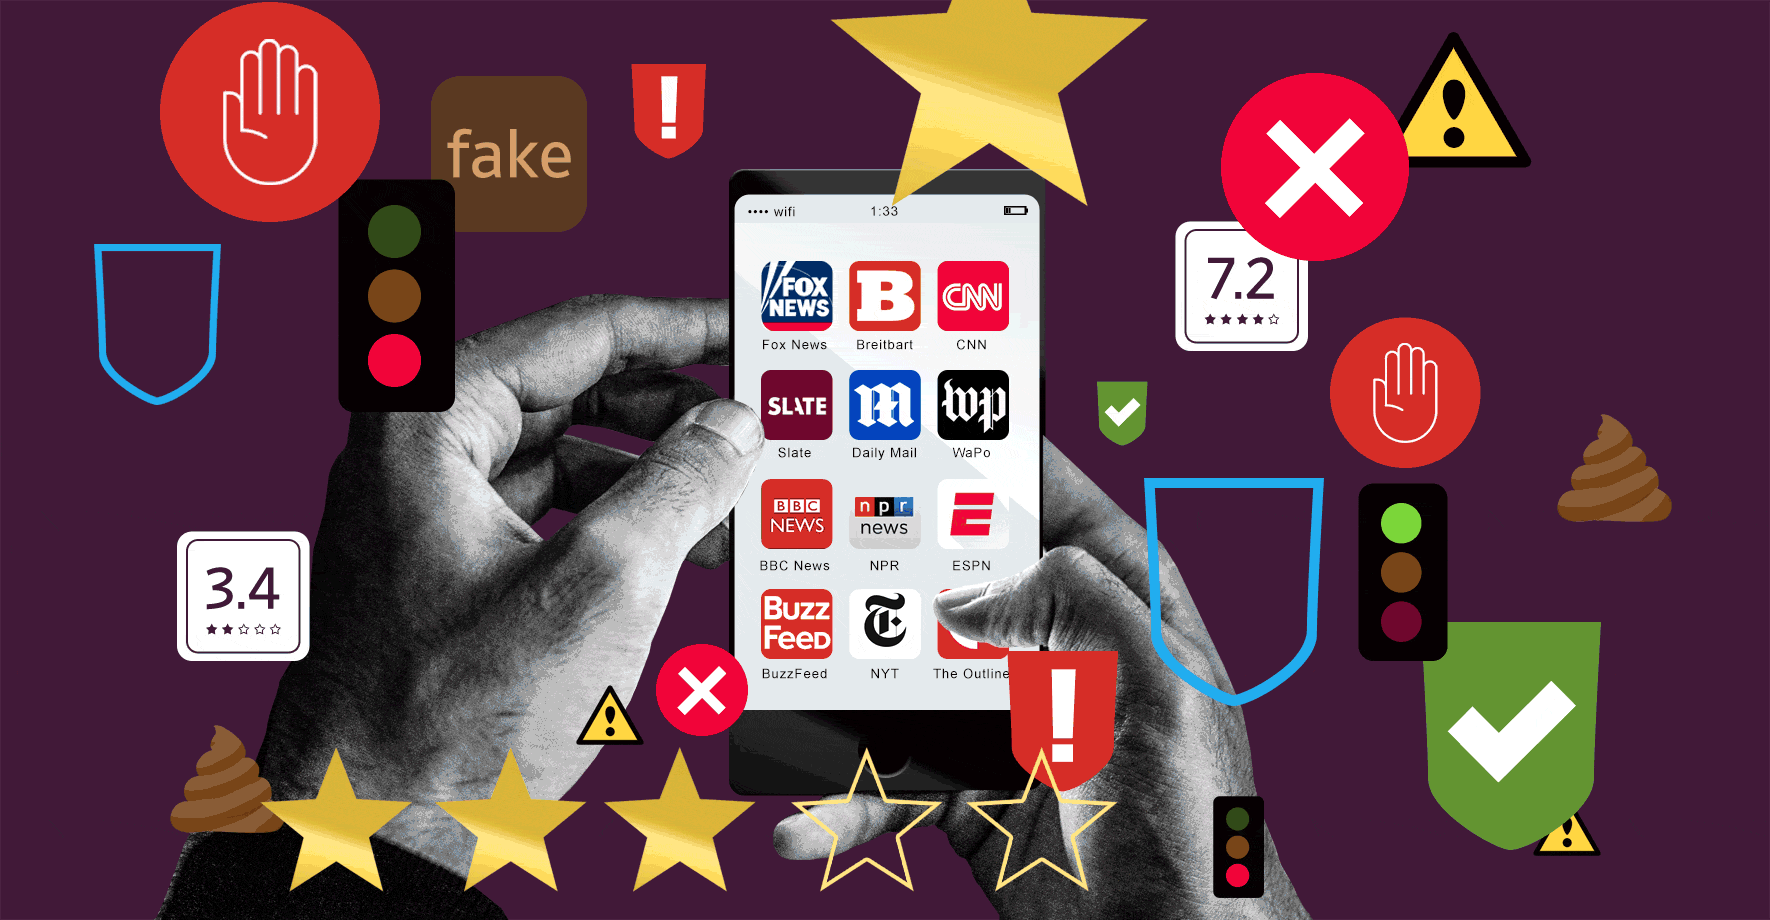 A smartphone with icons of news organizations is surrounded by shield icons from NewsGuard, star ratings, traffic lights, a piece of poop, and other rating symbols.